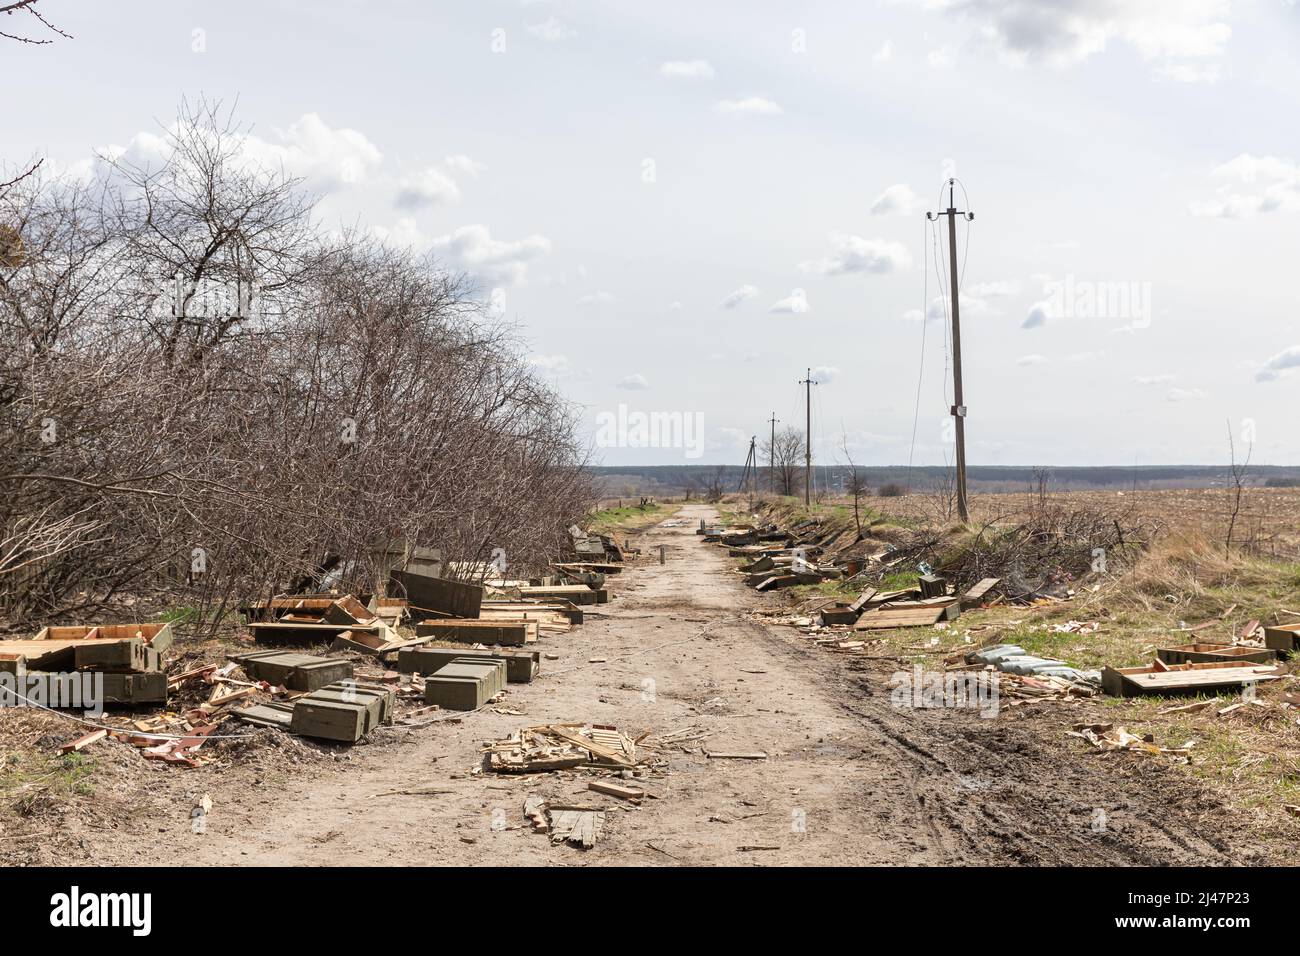 Andriivka, Ukraine. 12th Apr, 2022. Abandoned military equipment, shells and empty boxes of weapons are seen lying in the middle of the field along the road near Andriivka after the retreat of Russian troops. (Photo by Mykhaylo Palinchak/SOPA Images/Sipa USA) Credit: Sipa USA/Alamy Live News Stock Photo